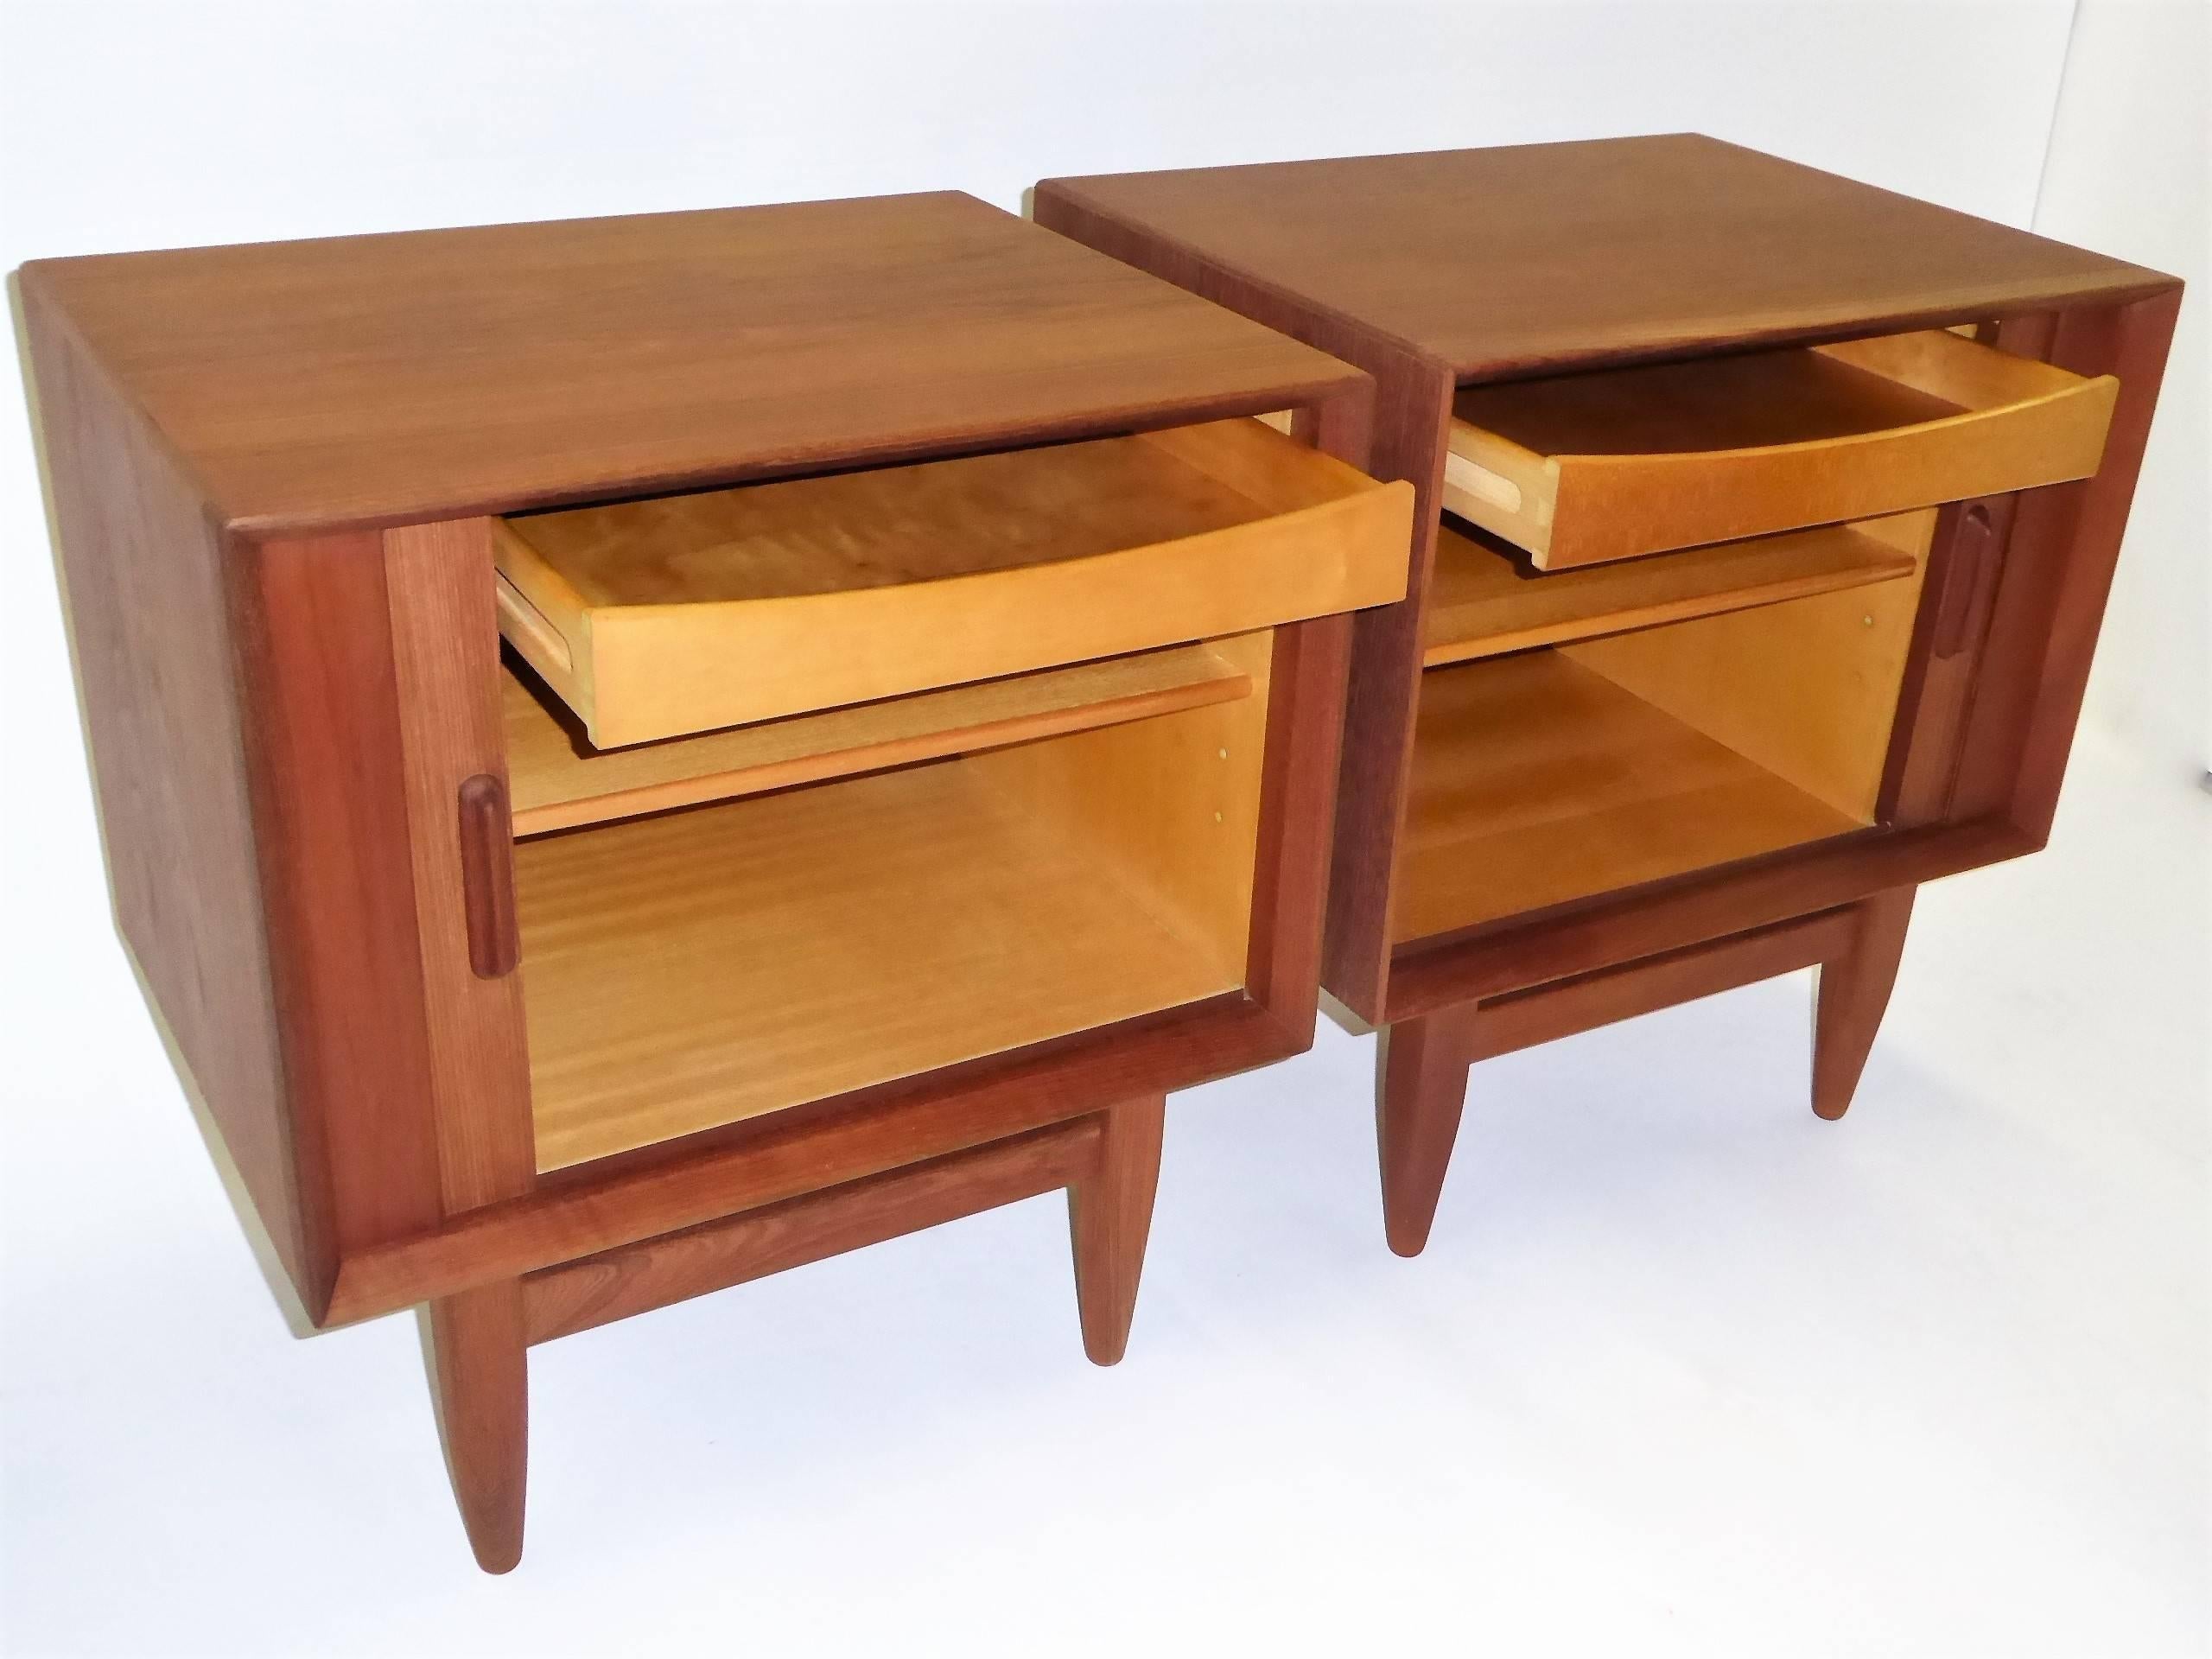 Mid-20th Century Pair of Early 1960s Danish Teak Nightstands by Arne Wahl Iversen for Falster